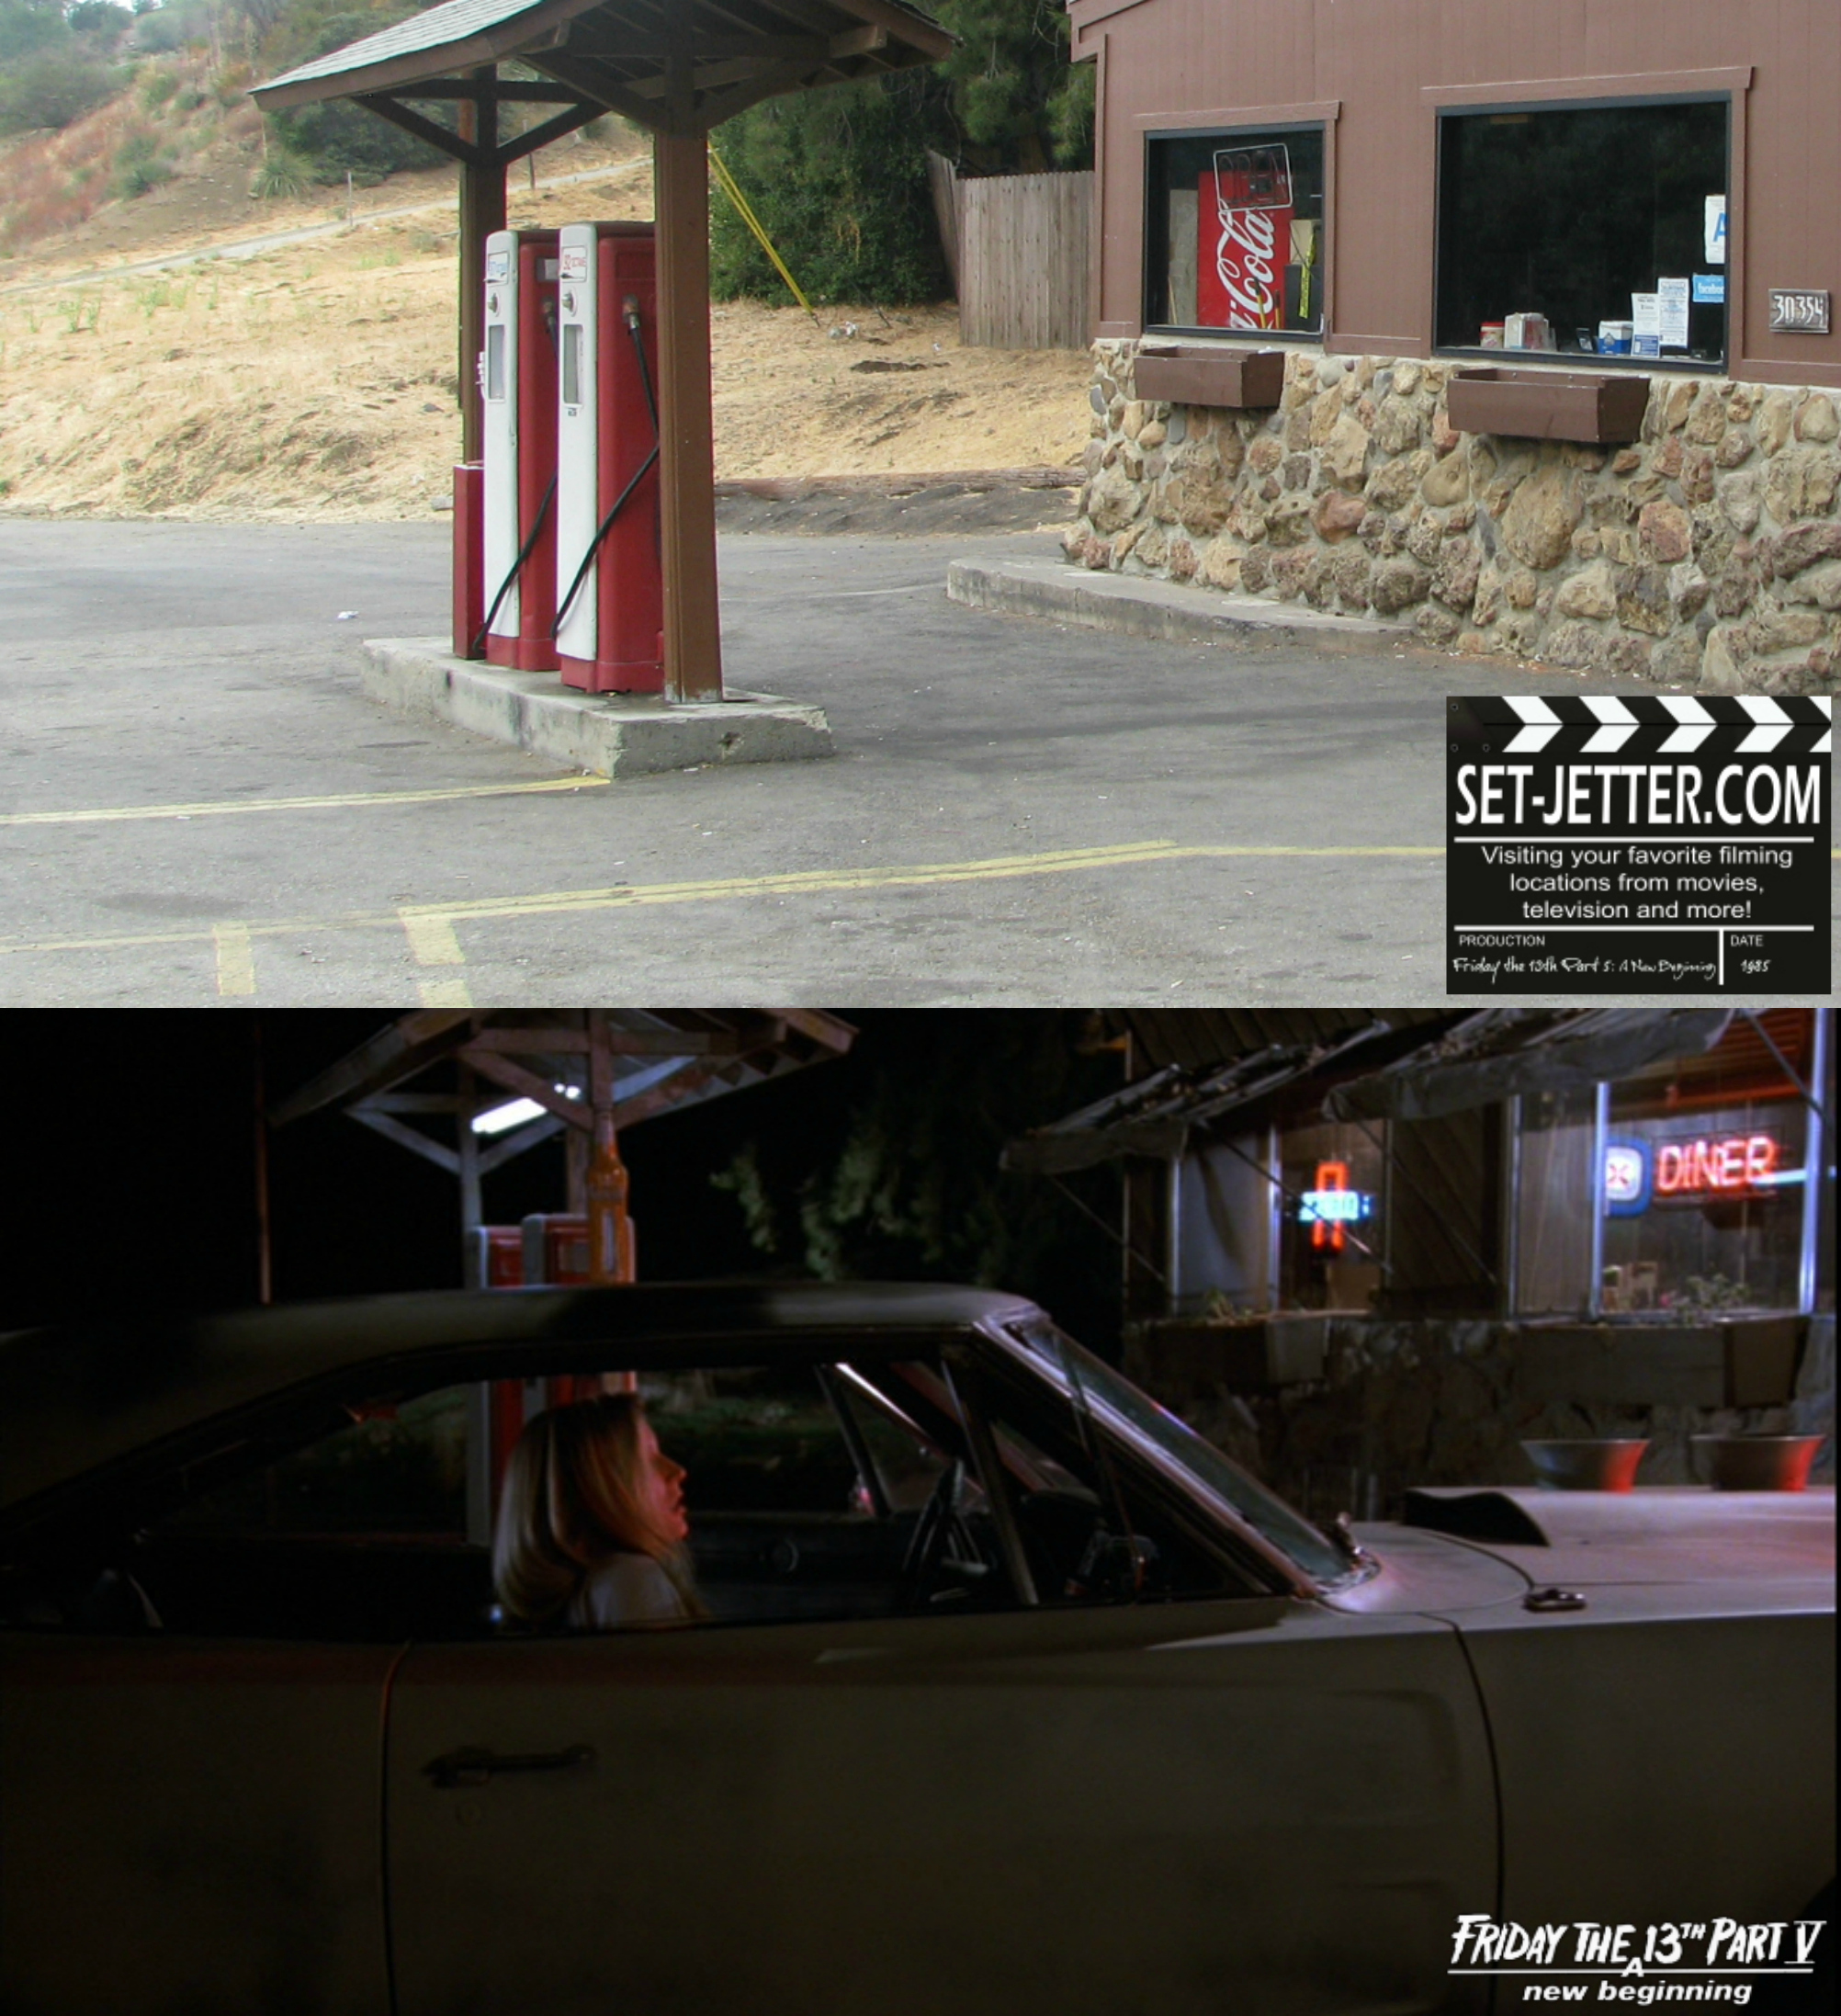 Friday the 13th Part V comparison 19.jpg